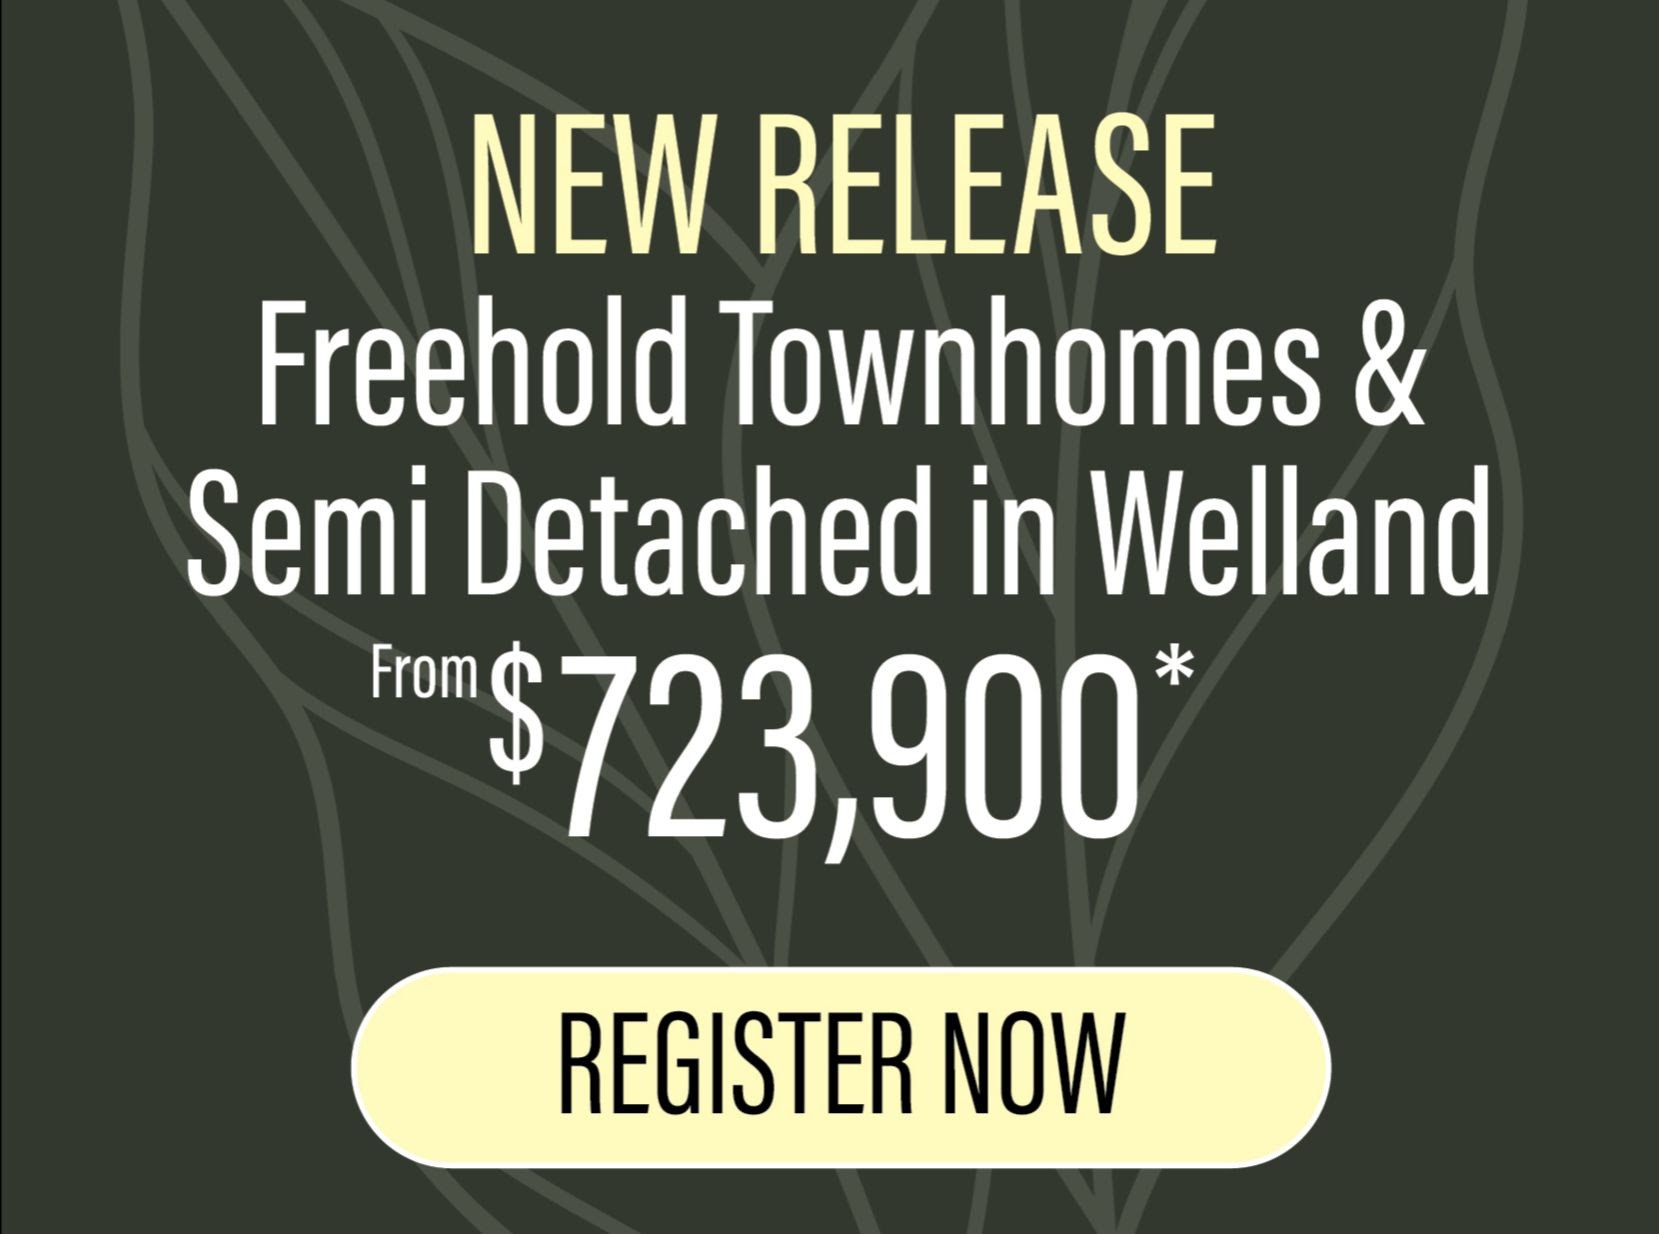 New Welland townhomes release starting at $723,900 advertisement.